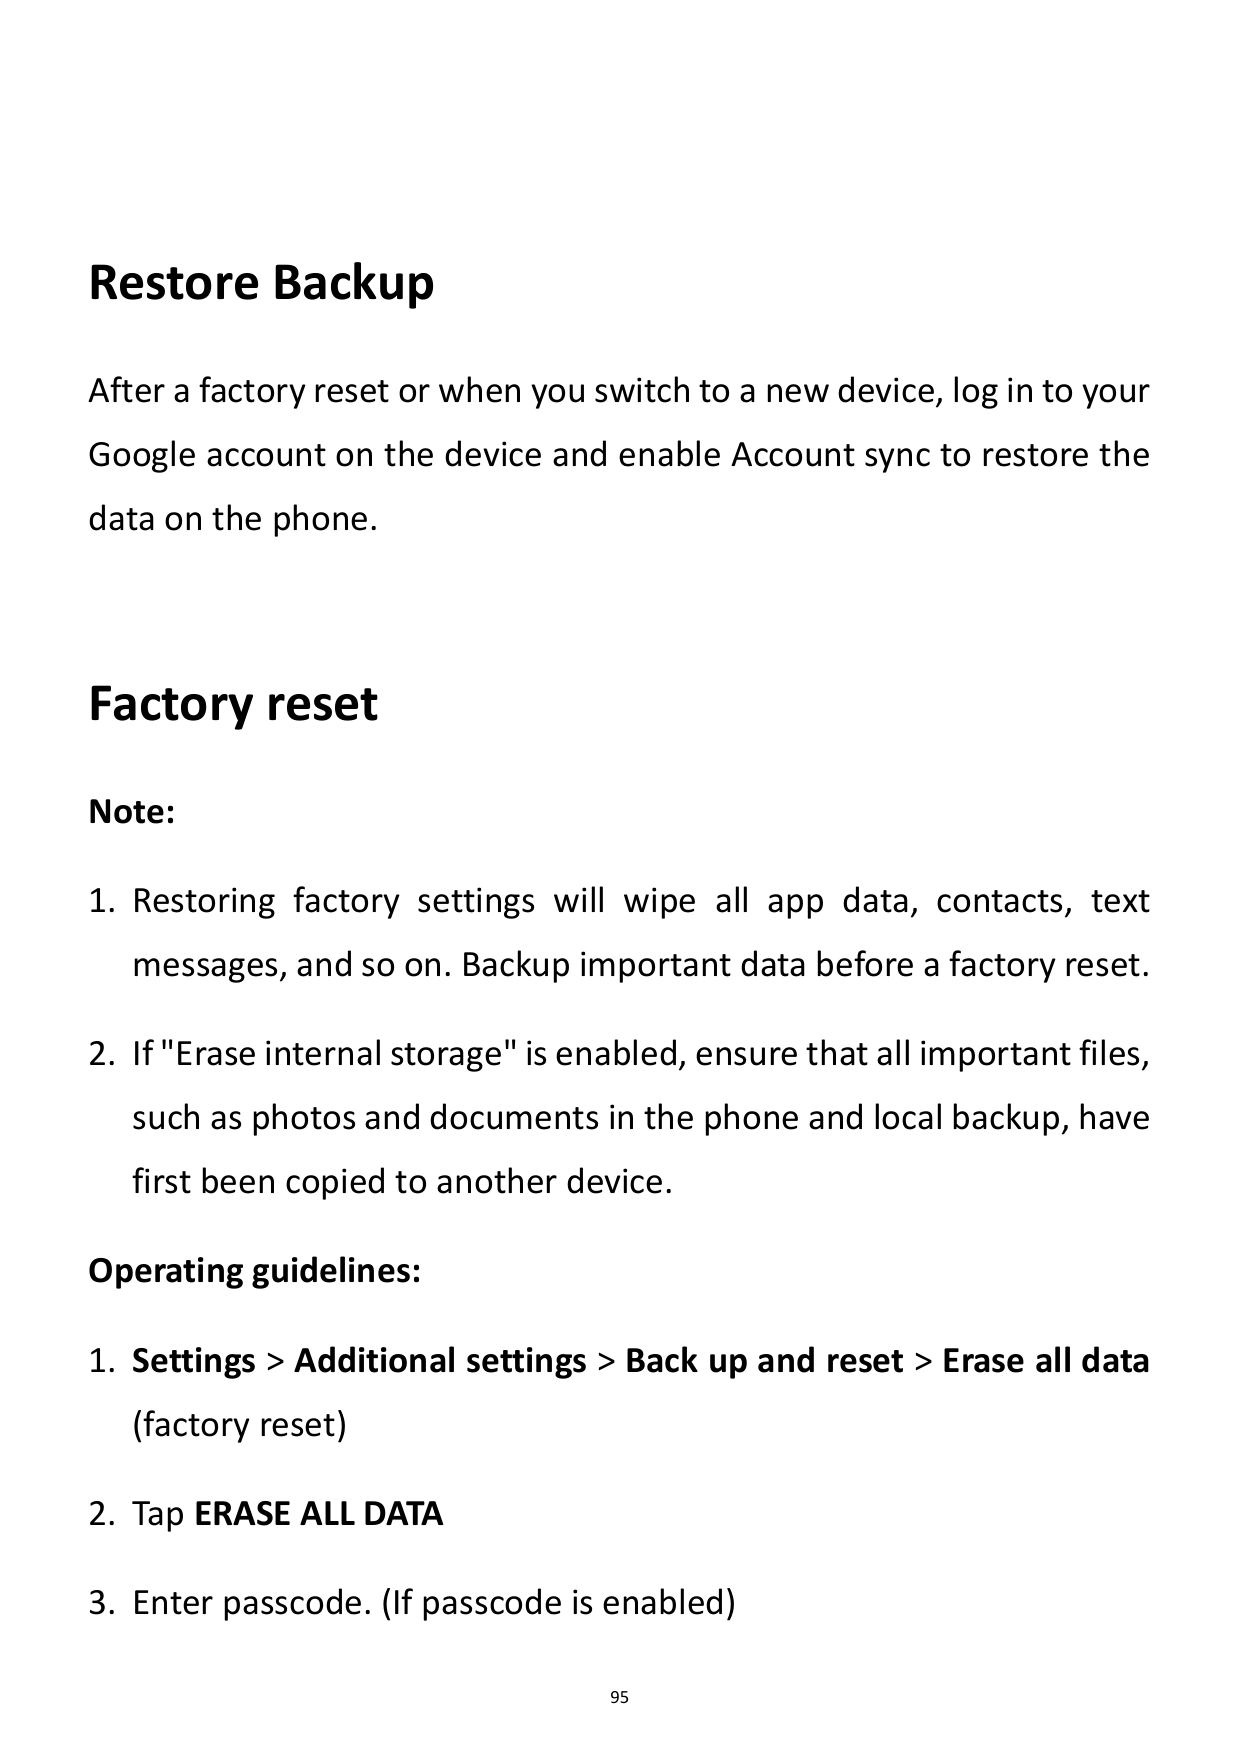 Restore BackupAfter a factory reset or when you switch to a new device, log in to yourGoogle account on the device and enable Ac